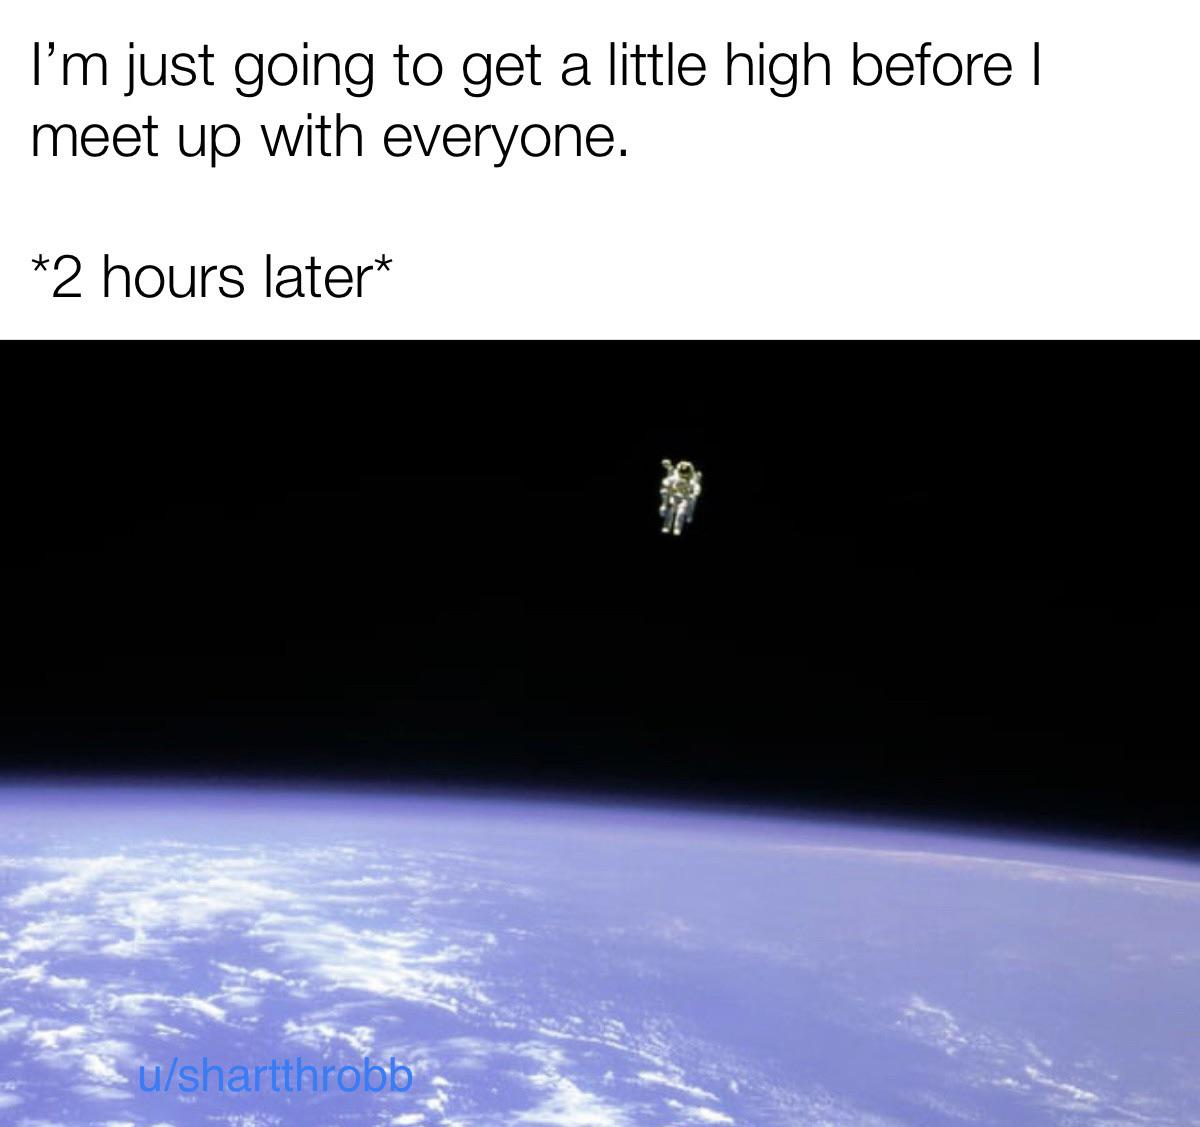 funny memes - bruce mccandless - I'm just going to get a little high before I meet up with everyone. 2 hours later ushartthrobb